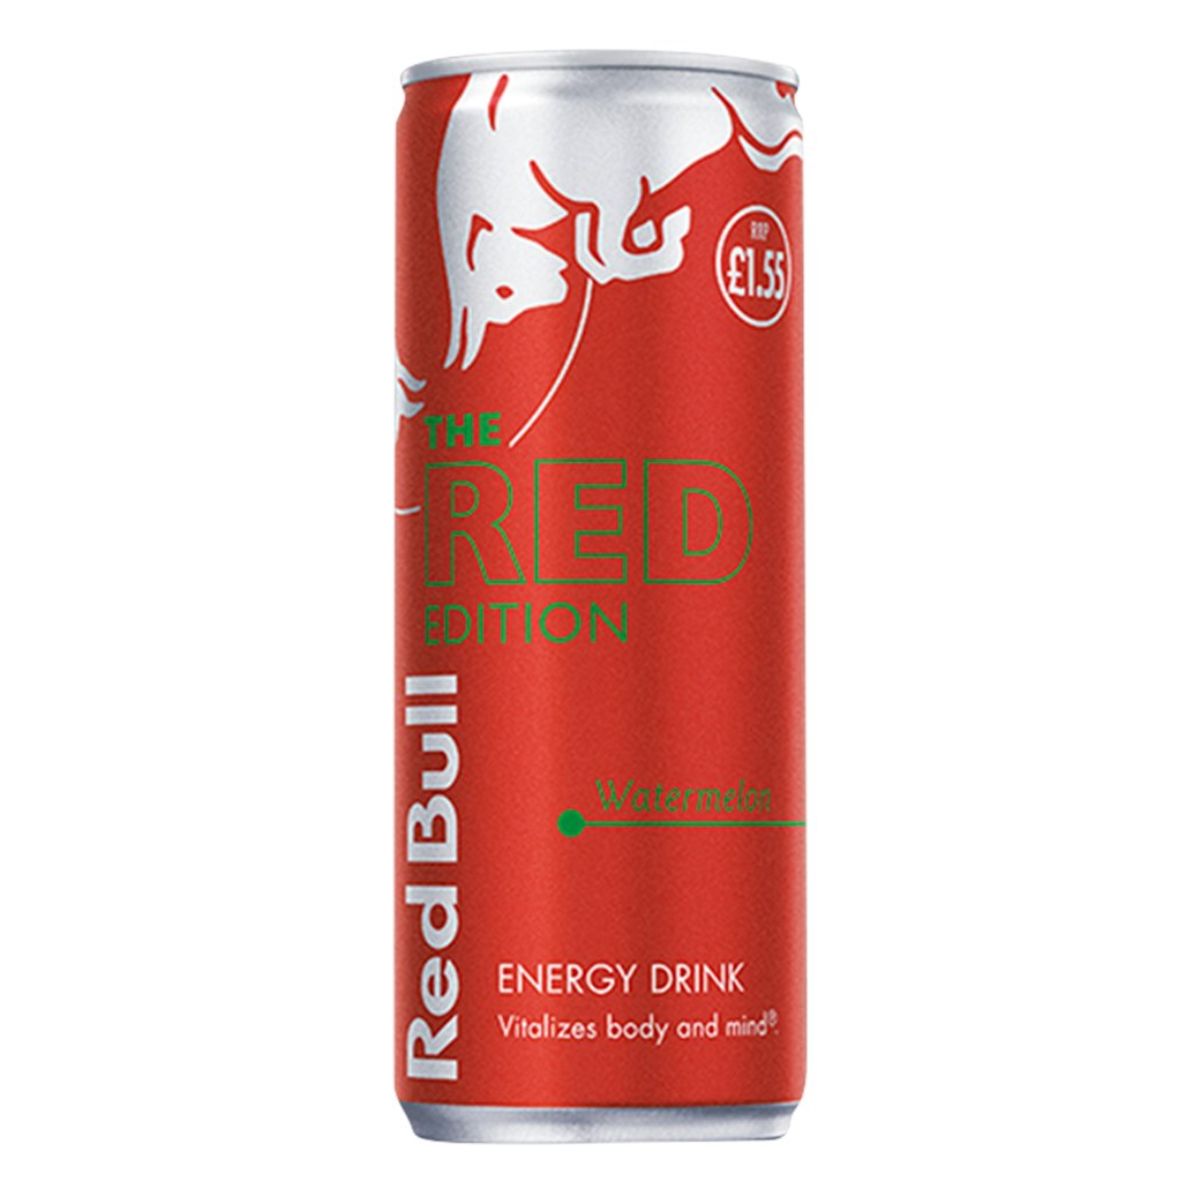 A Red Bull - Energy Drink Red Edition - 250ml on a white background.